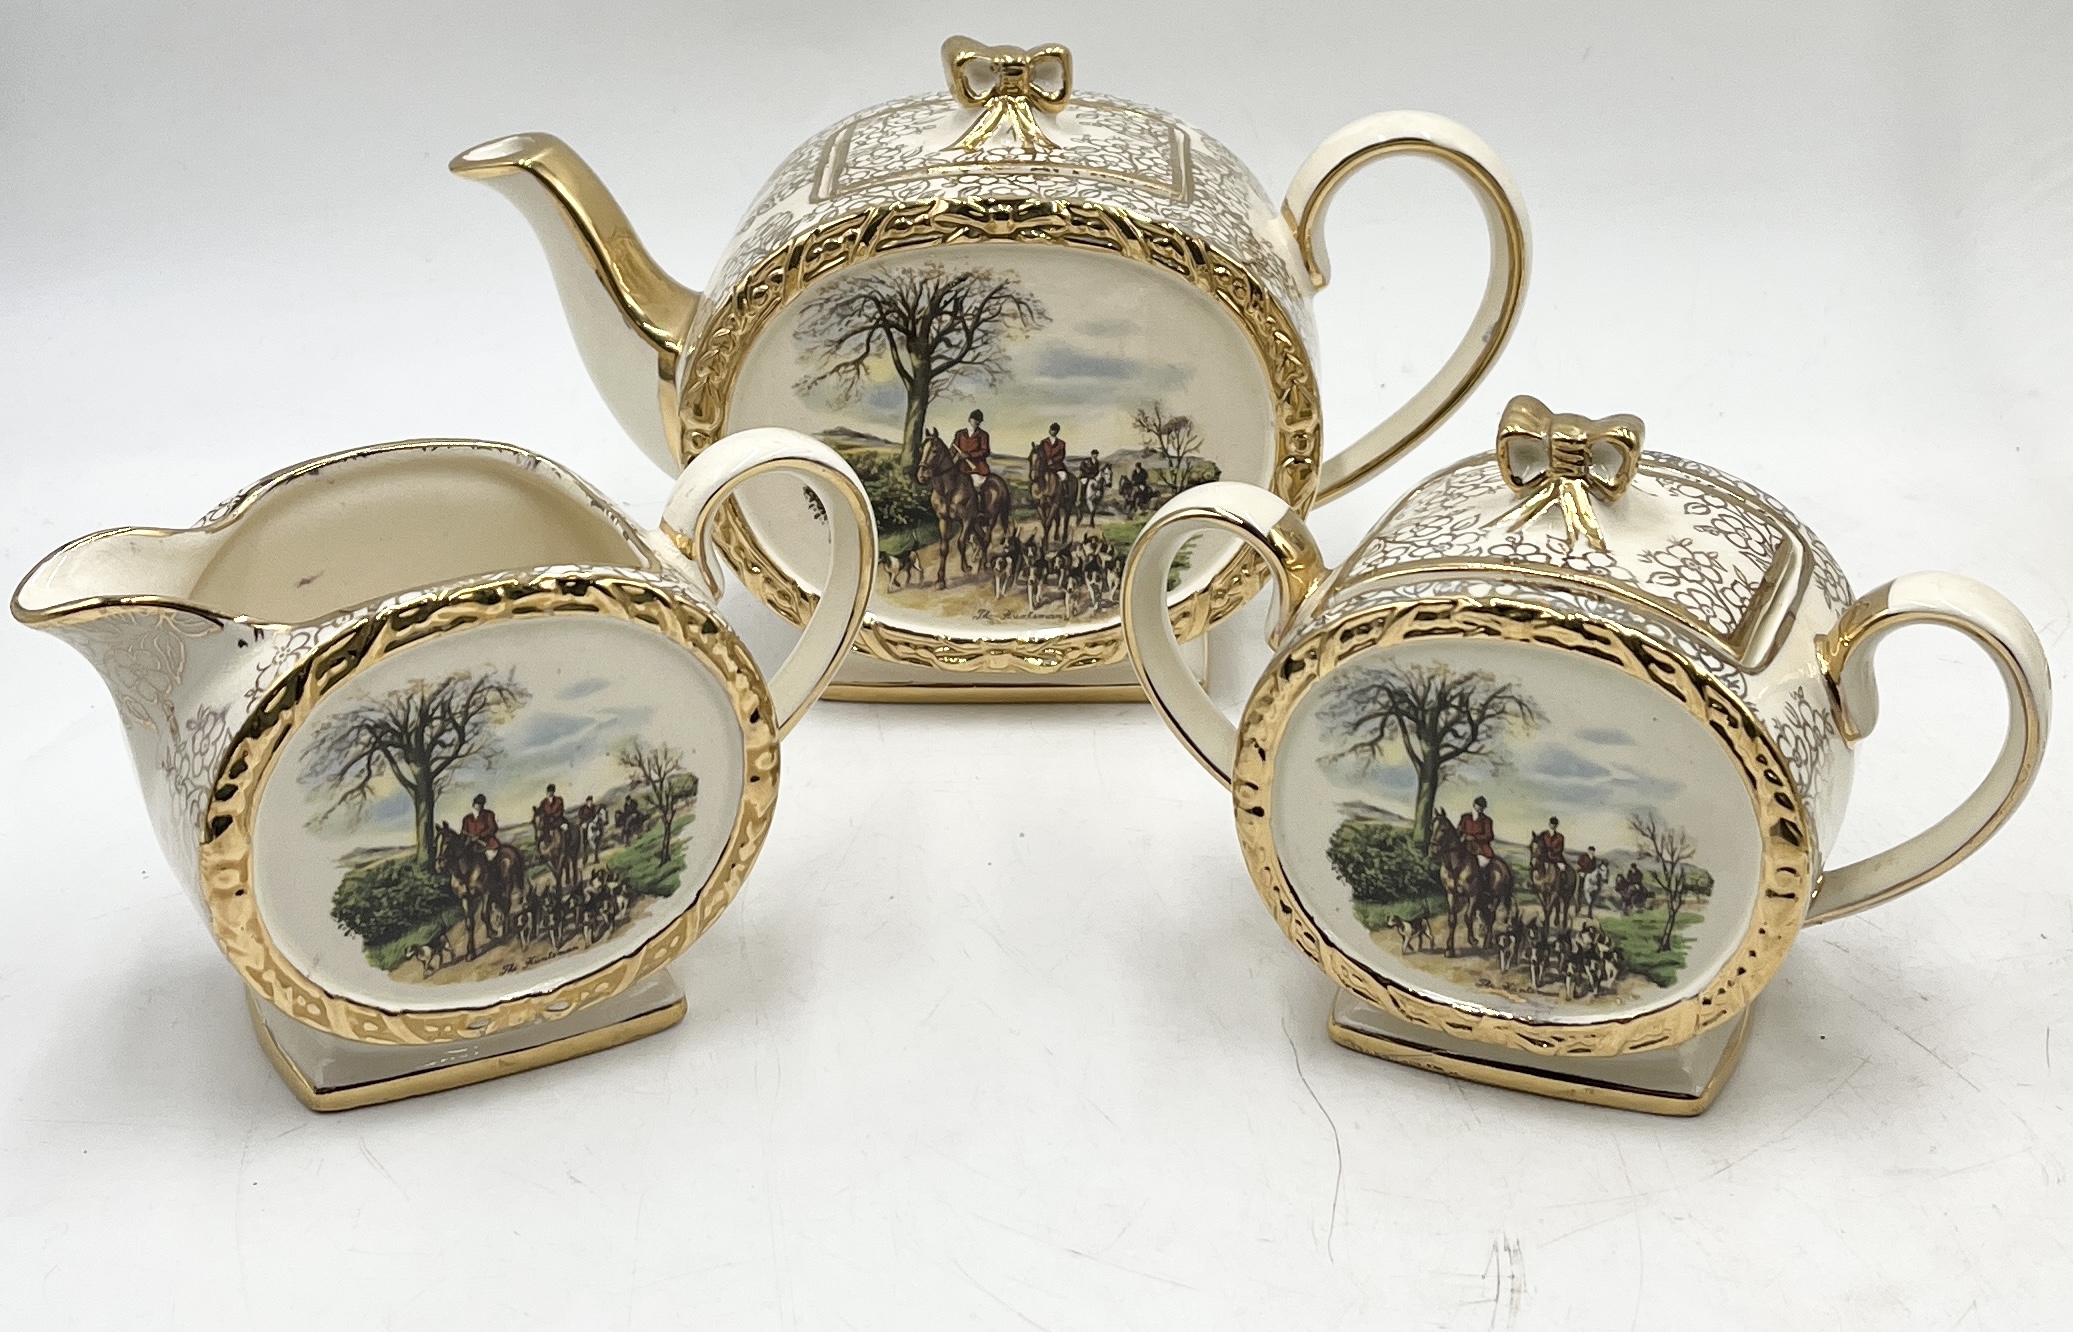 A gilt glass jug and six glasses along with a Sadler's teapot, sugar bowl and jug all decorated with - Image 2 of 5